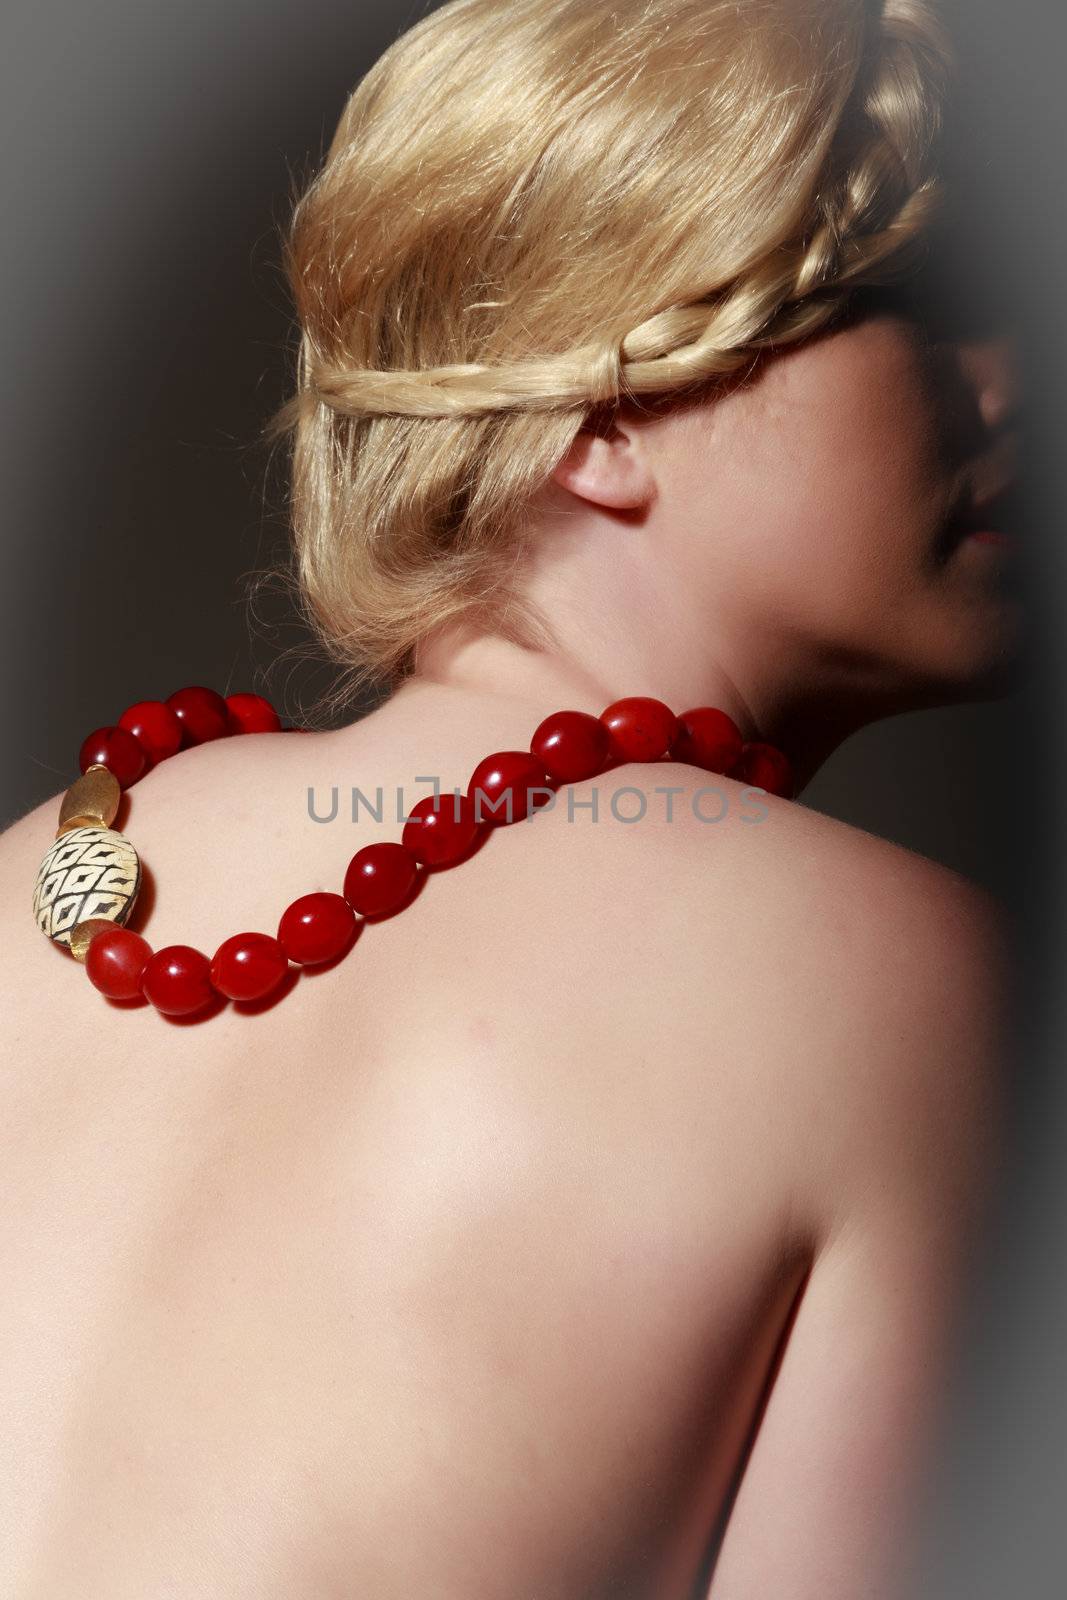 Blonde woman in covert act with a romantic hairstyle and designer necklace